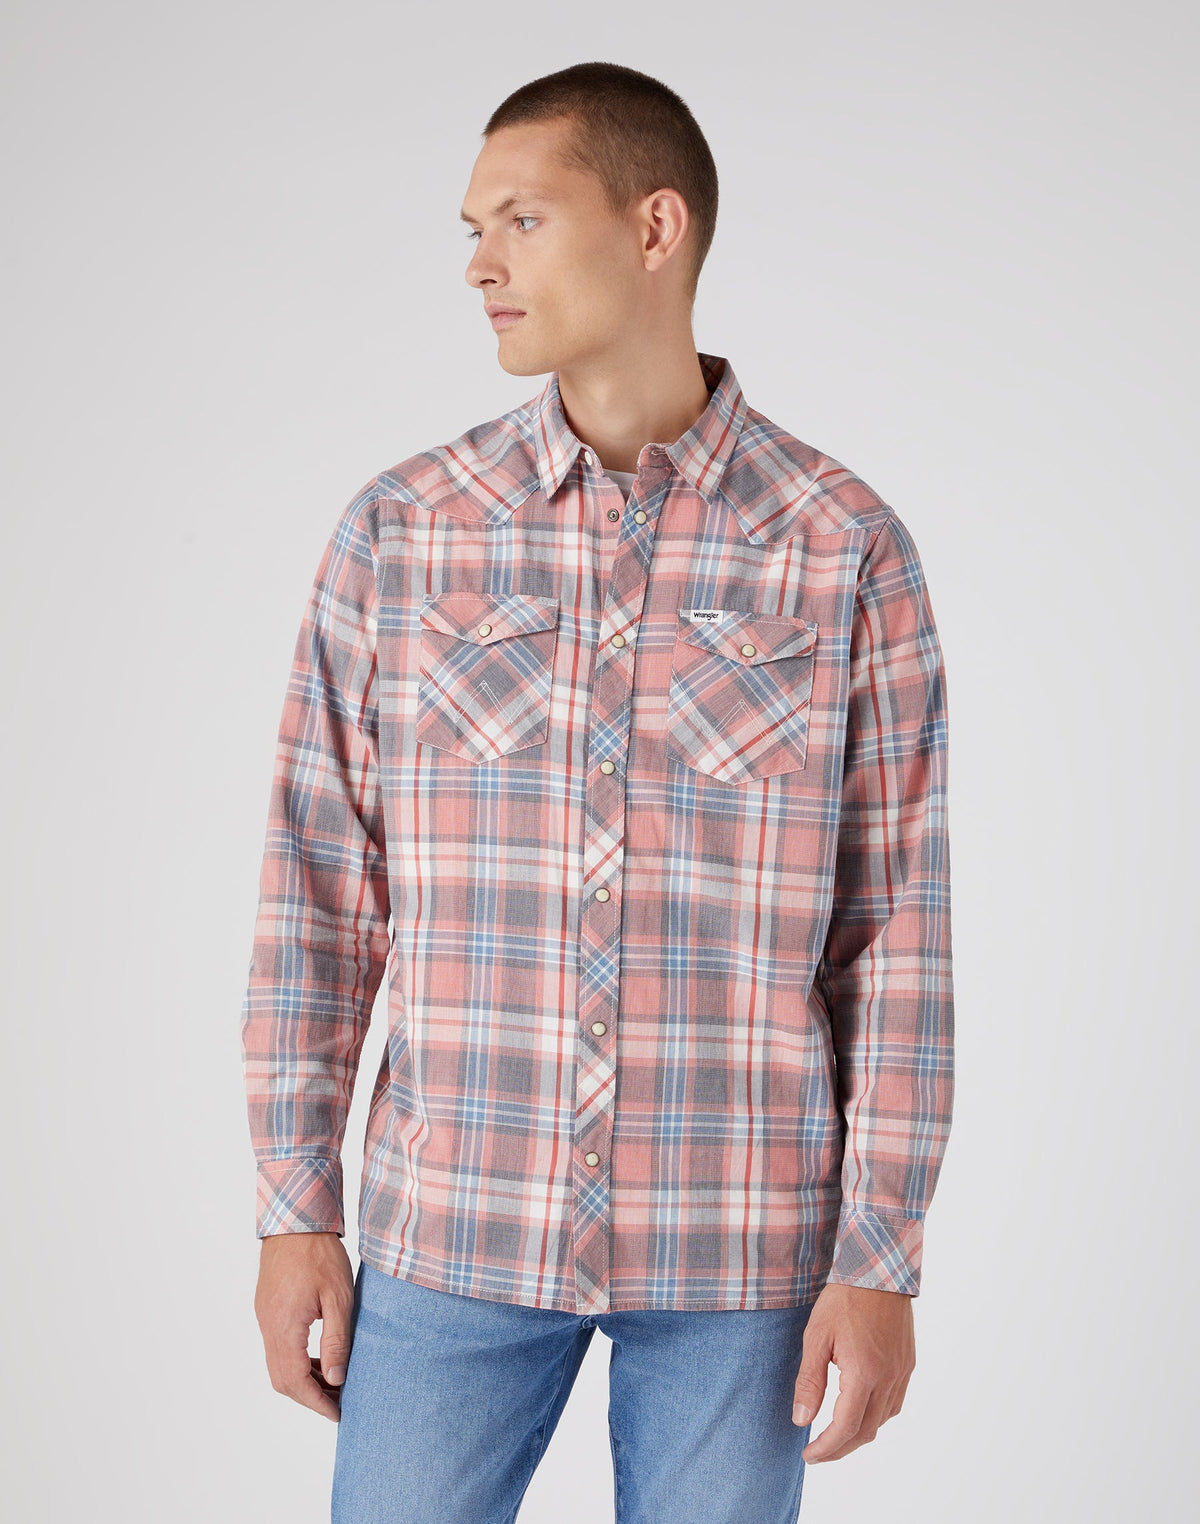 Western Shirt in Faded Rose